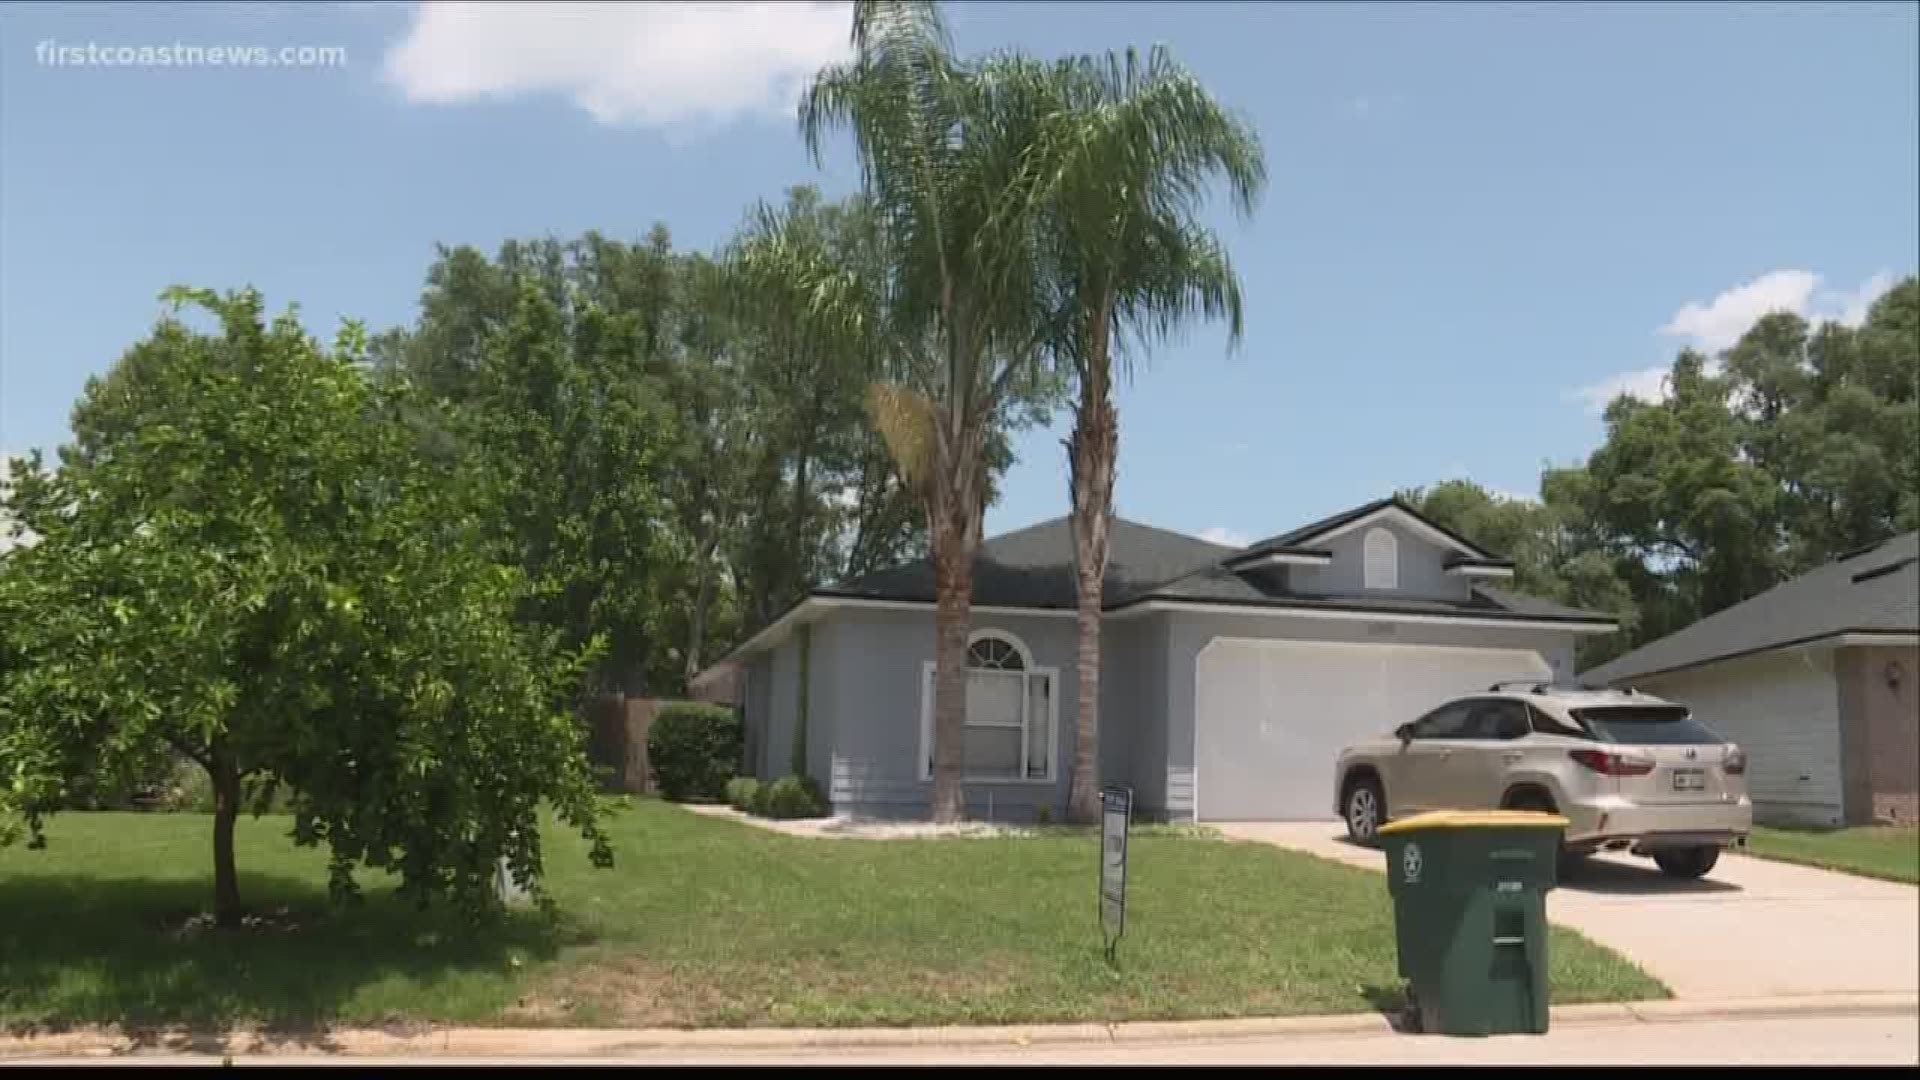 A study ranked 40 cities that could be at risk for a housing crash this year, Jacksonville came in at 28.